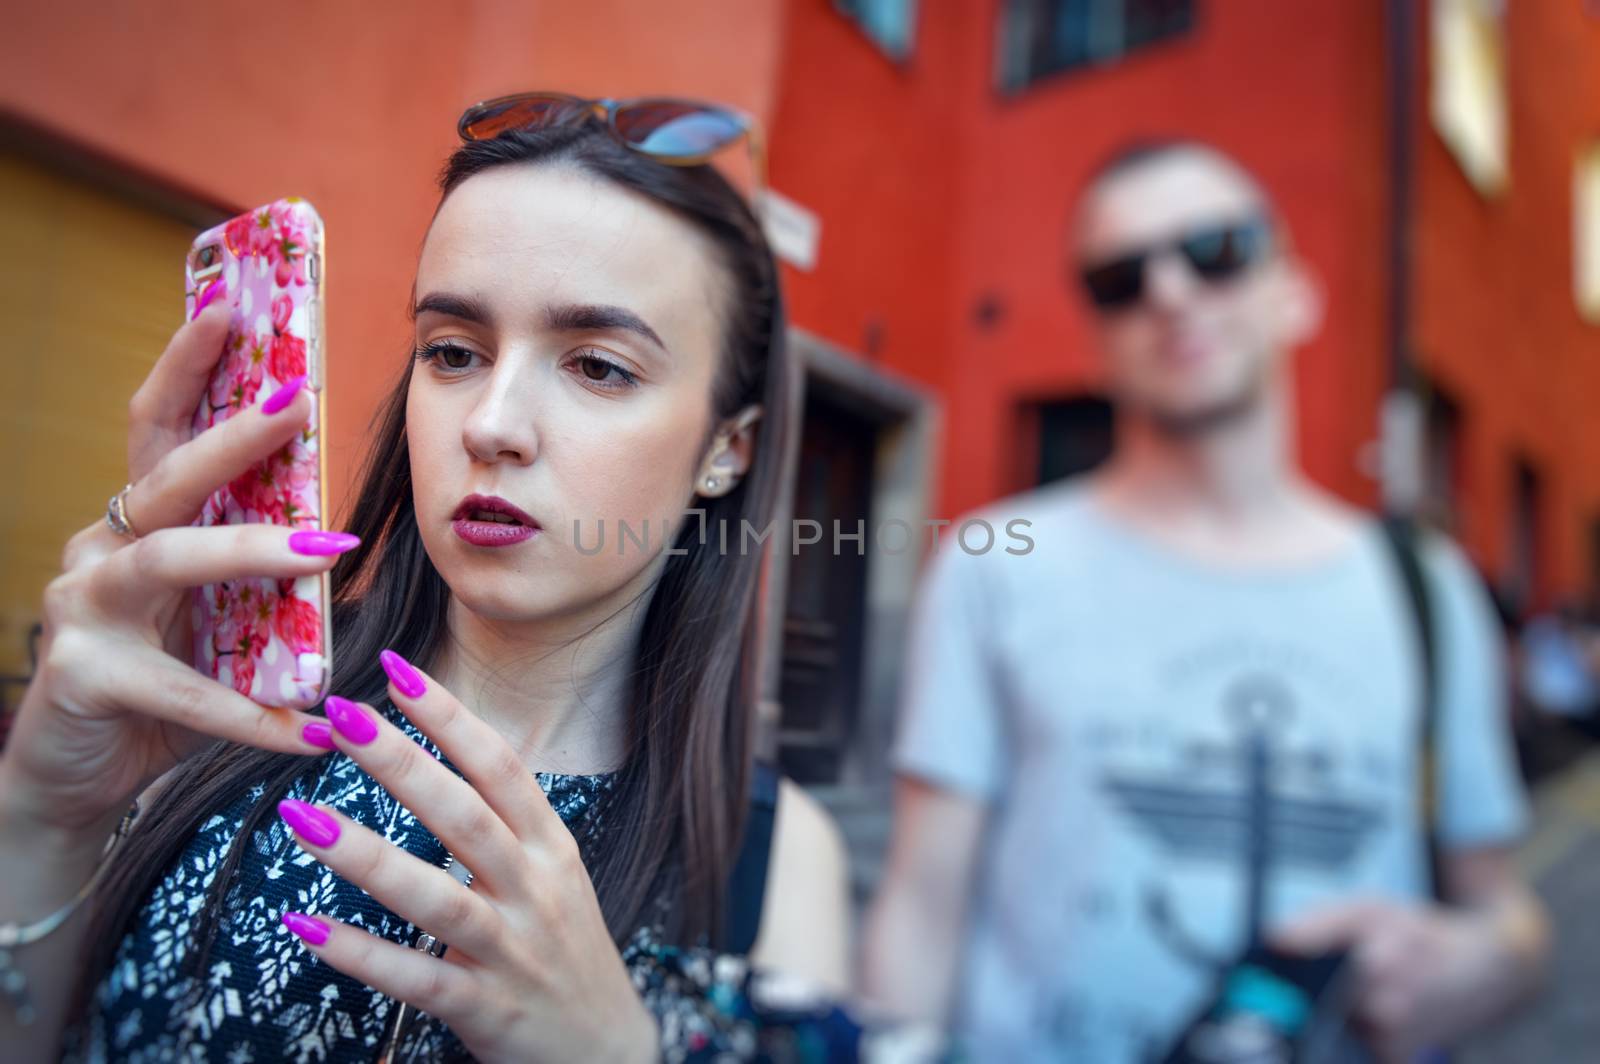 Woman looks into the phone and walks down the street with a man behind. Model wearing stylish sunglasses. City lifestyle. Female fashion concept.